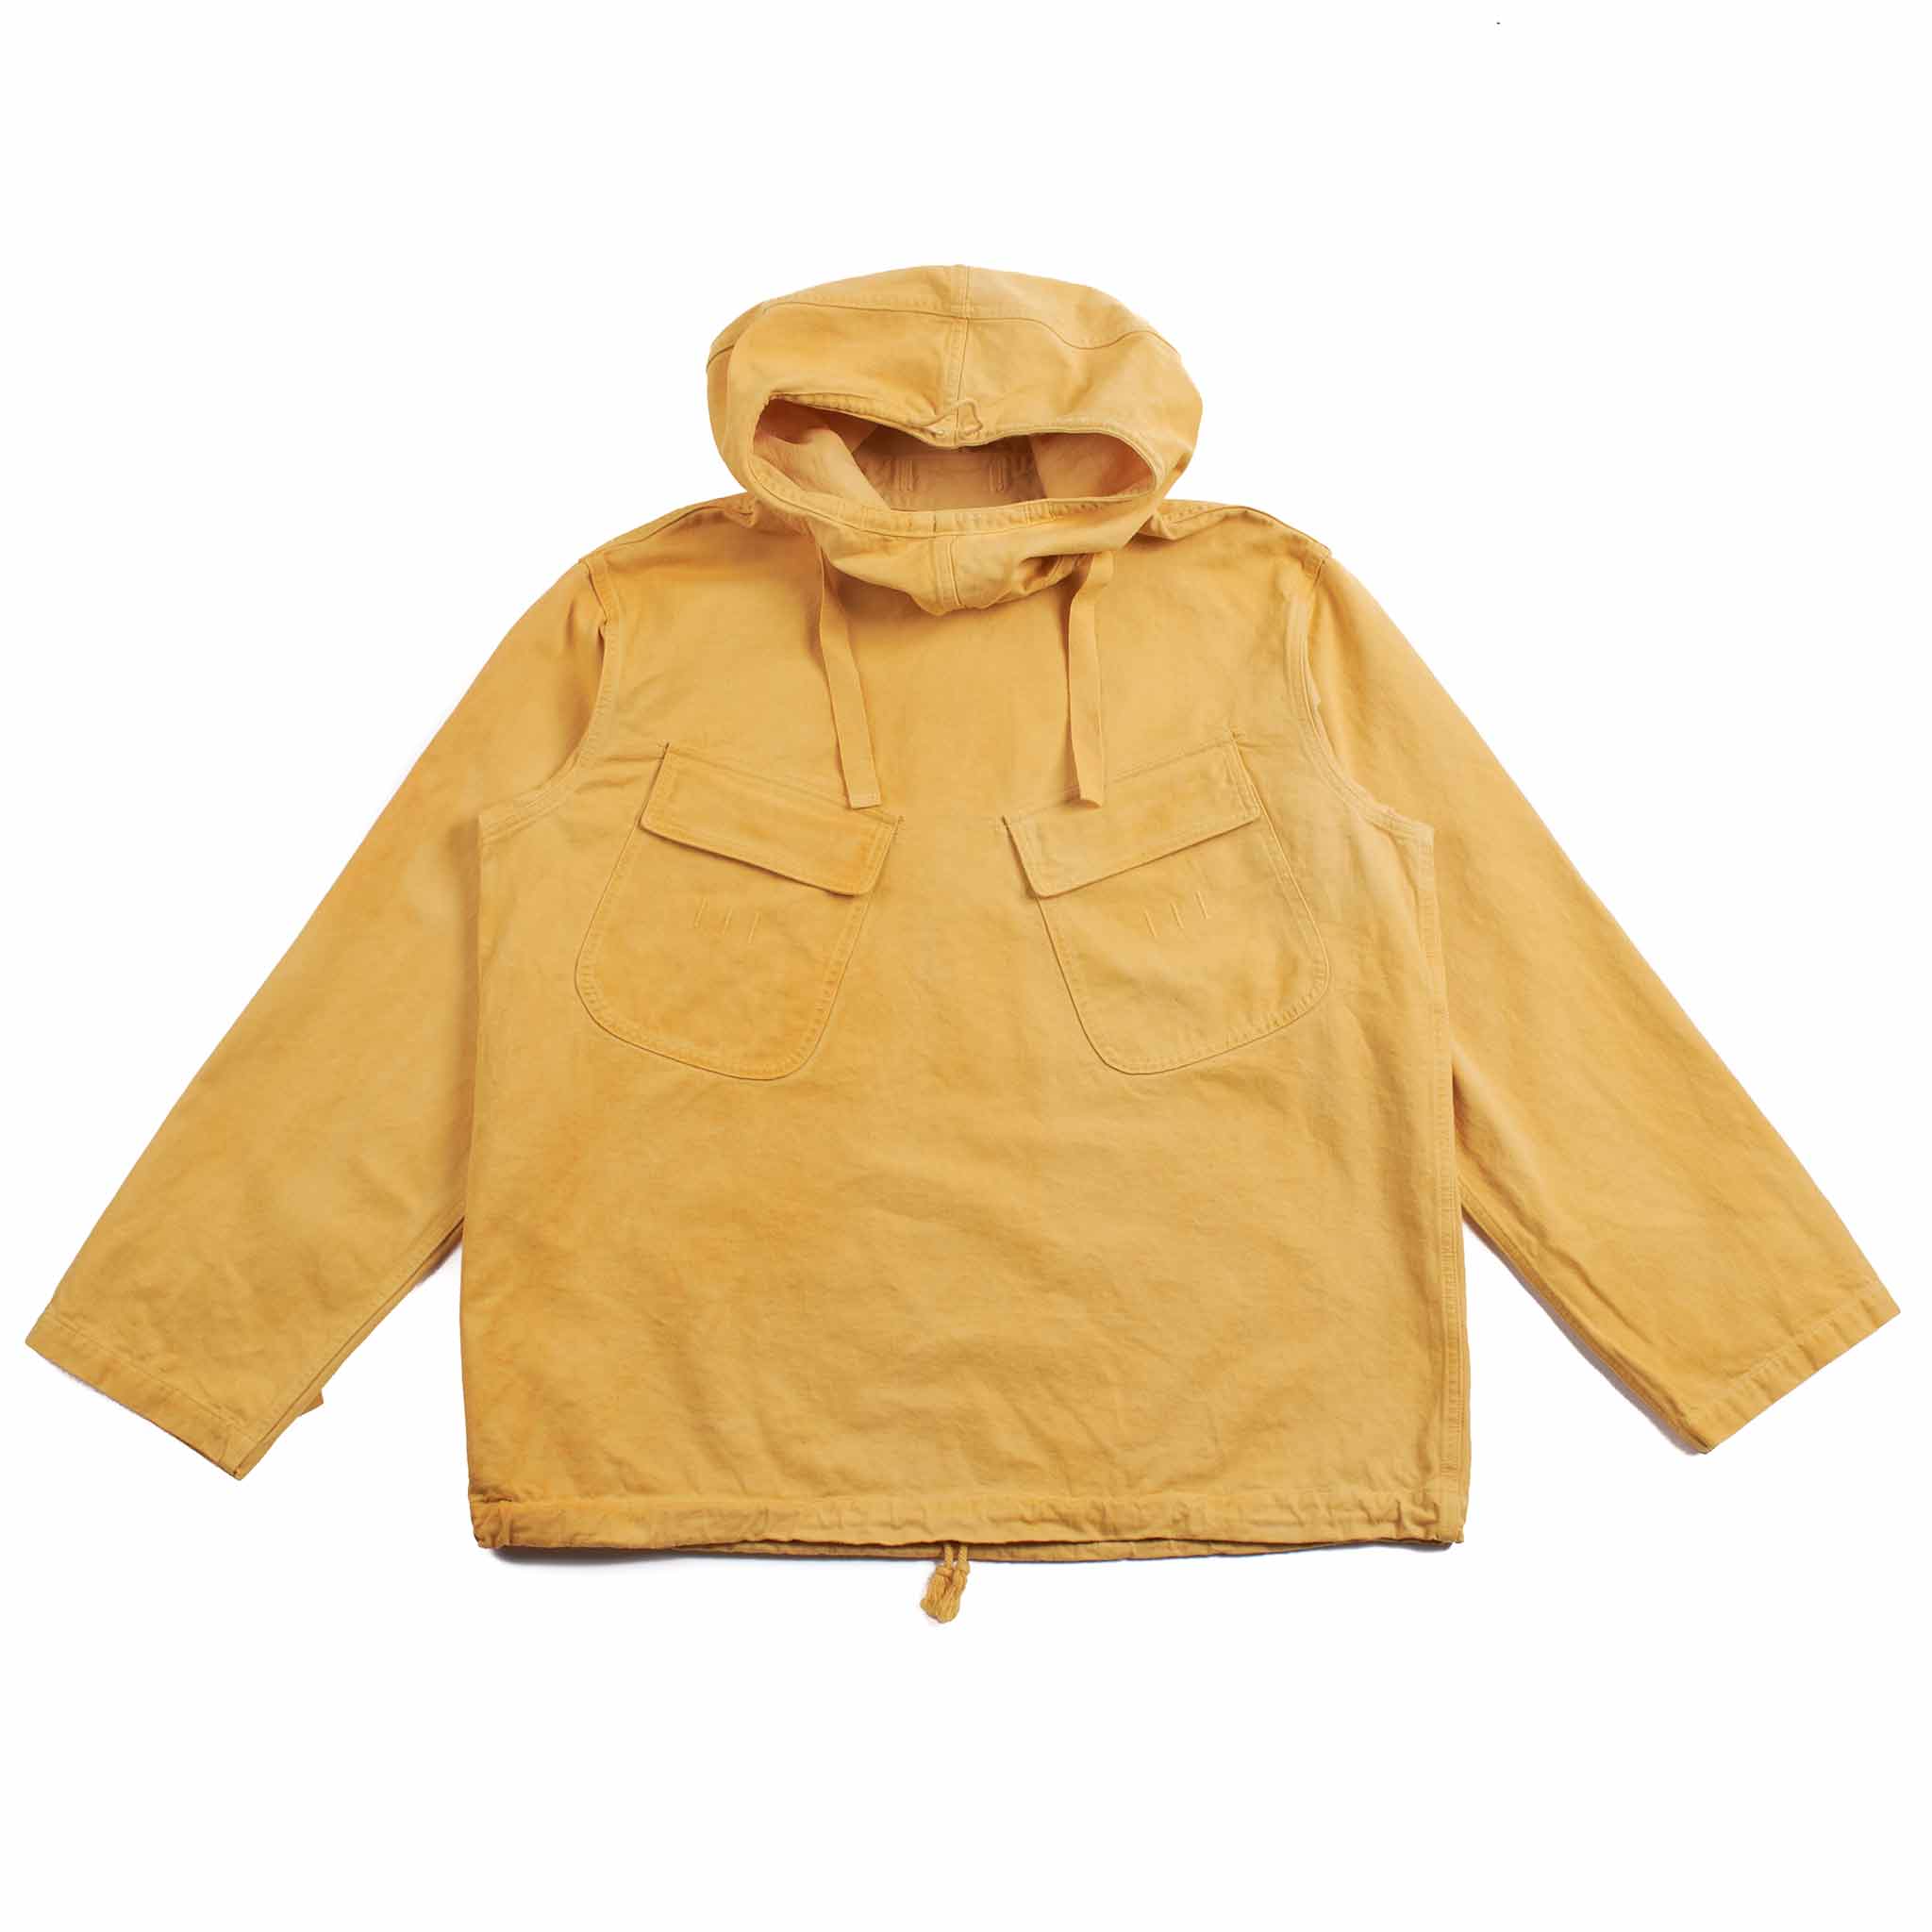 The Real McCoy's MJ21022 USN Salvage Smock Parka (Over-Dyed) Yellow